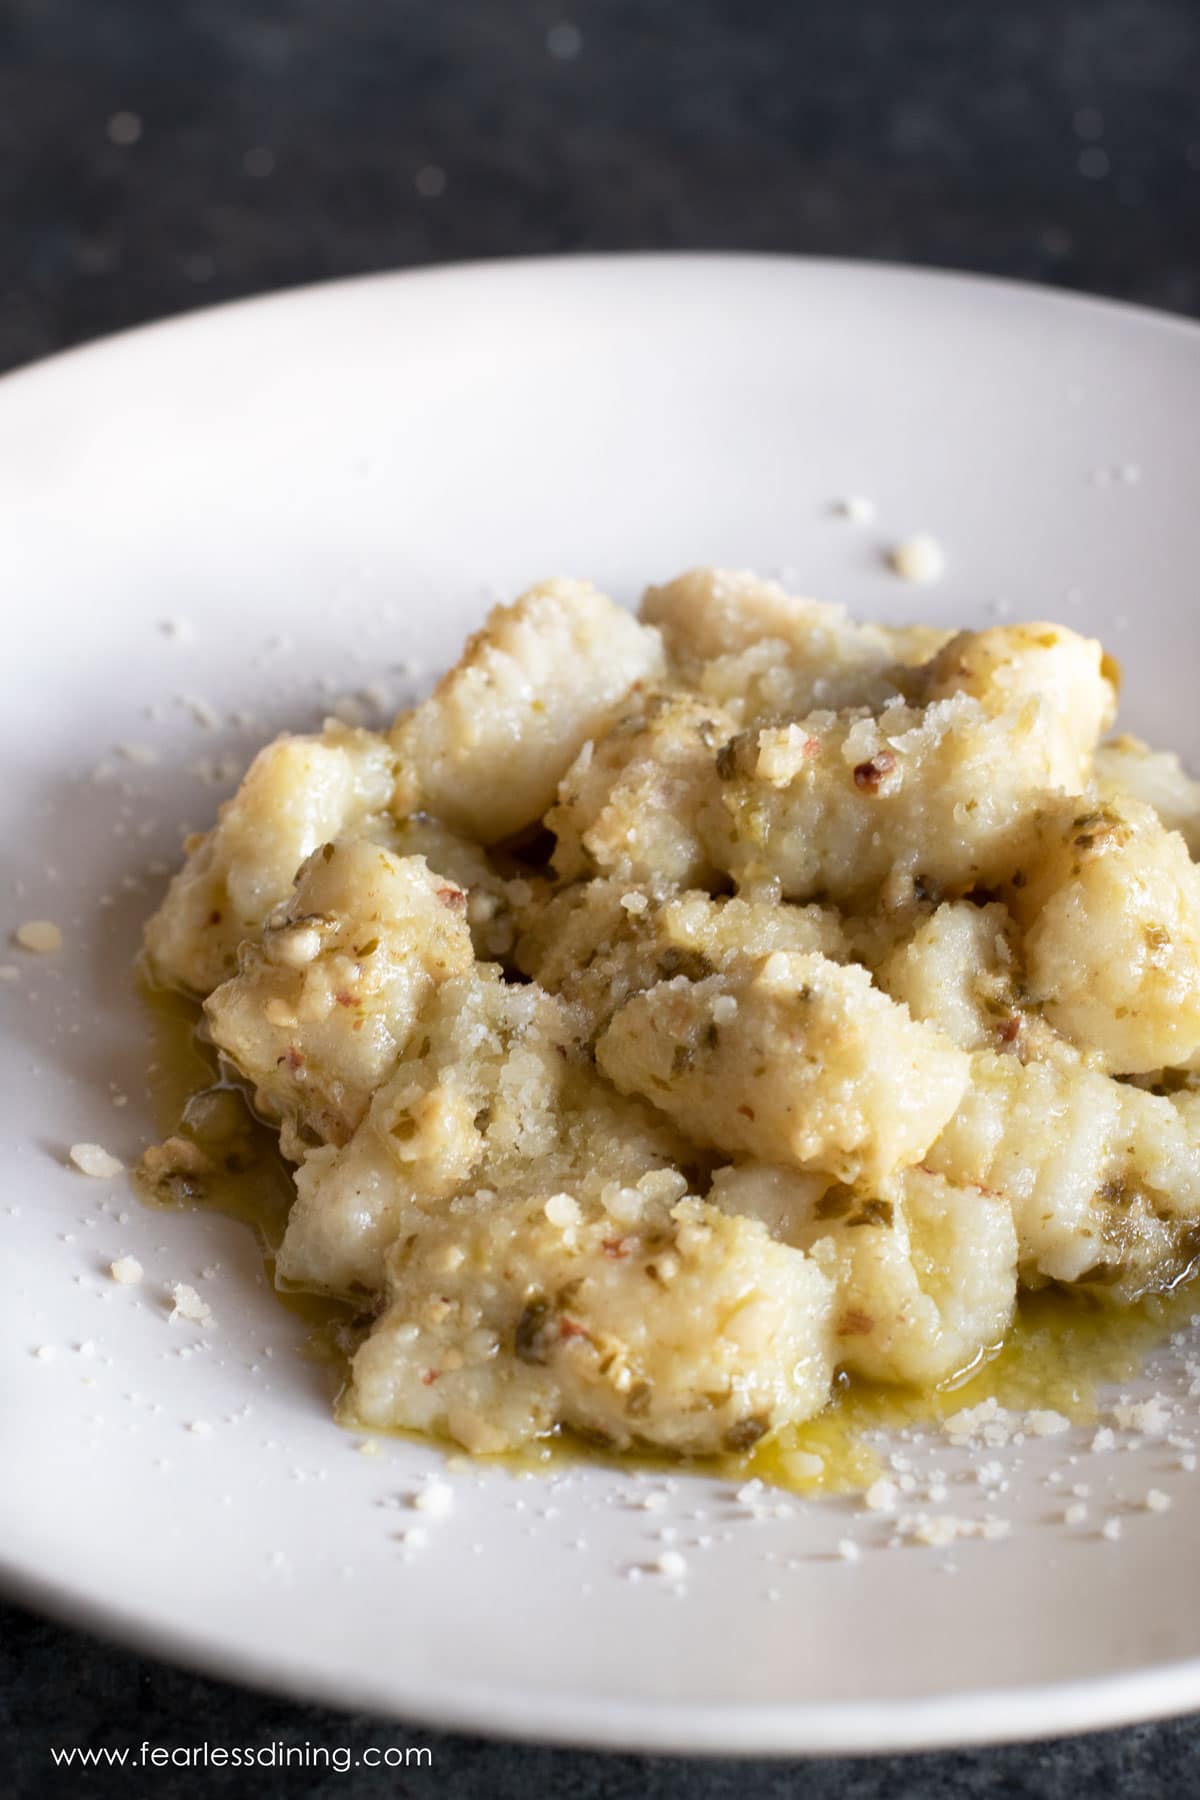 a plate of gnocchi with pesto sauce.